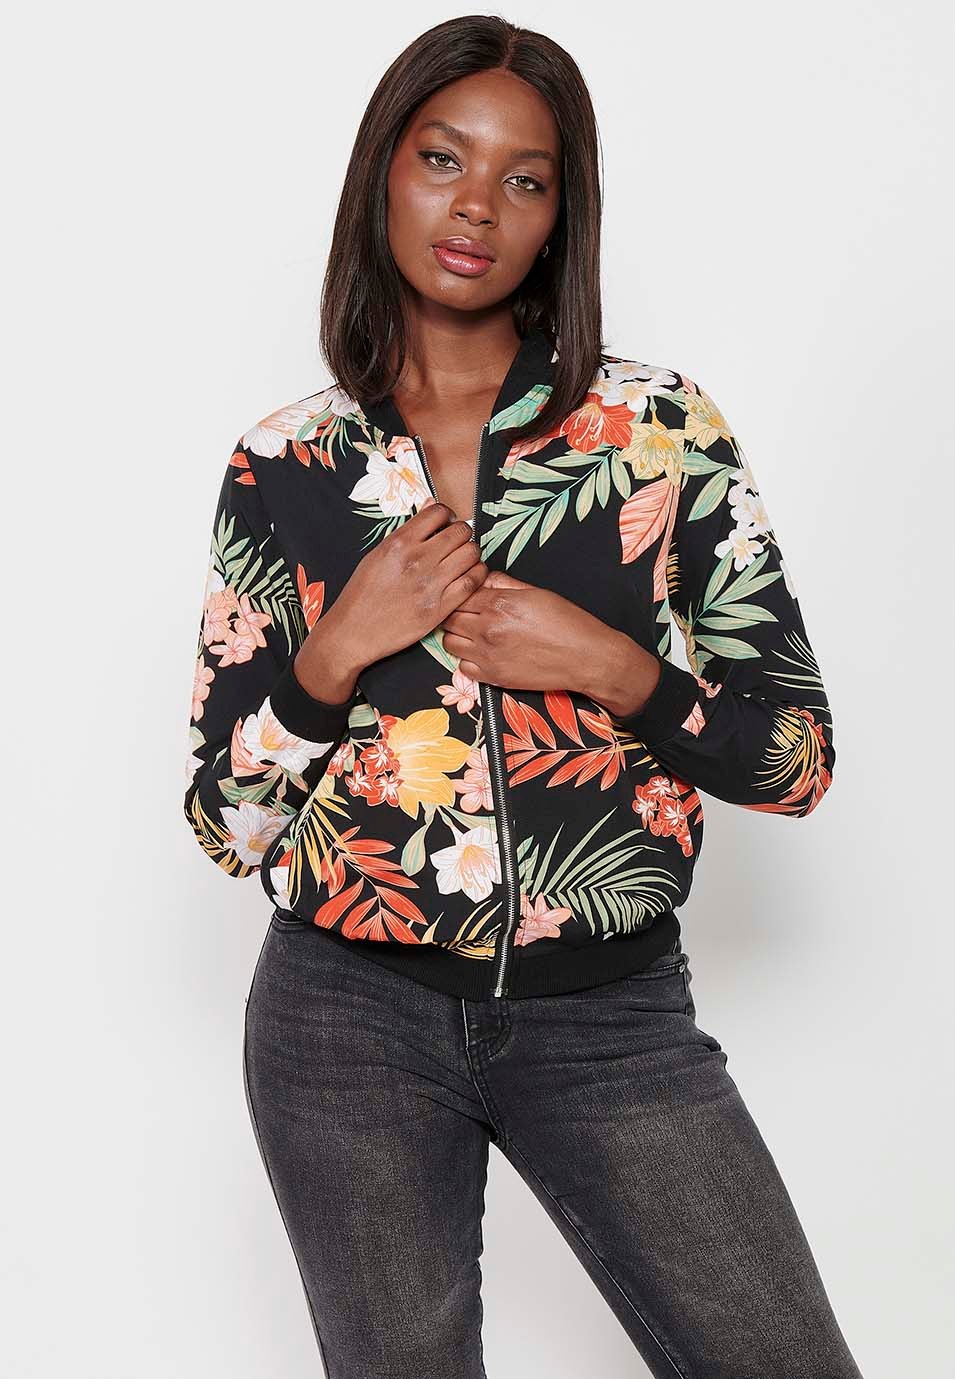 Long-sleeved sweatshirt jacket with ribbed finishes and floral print with front zipper closure in Multicolor for Women 3